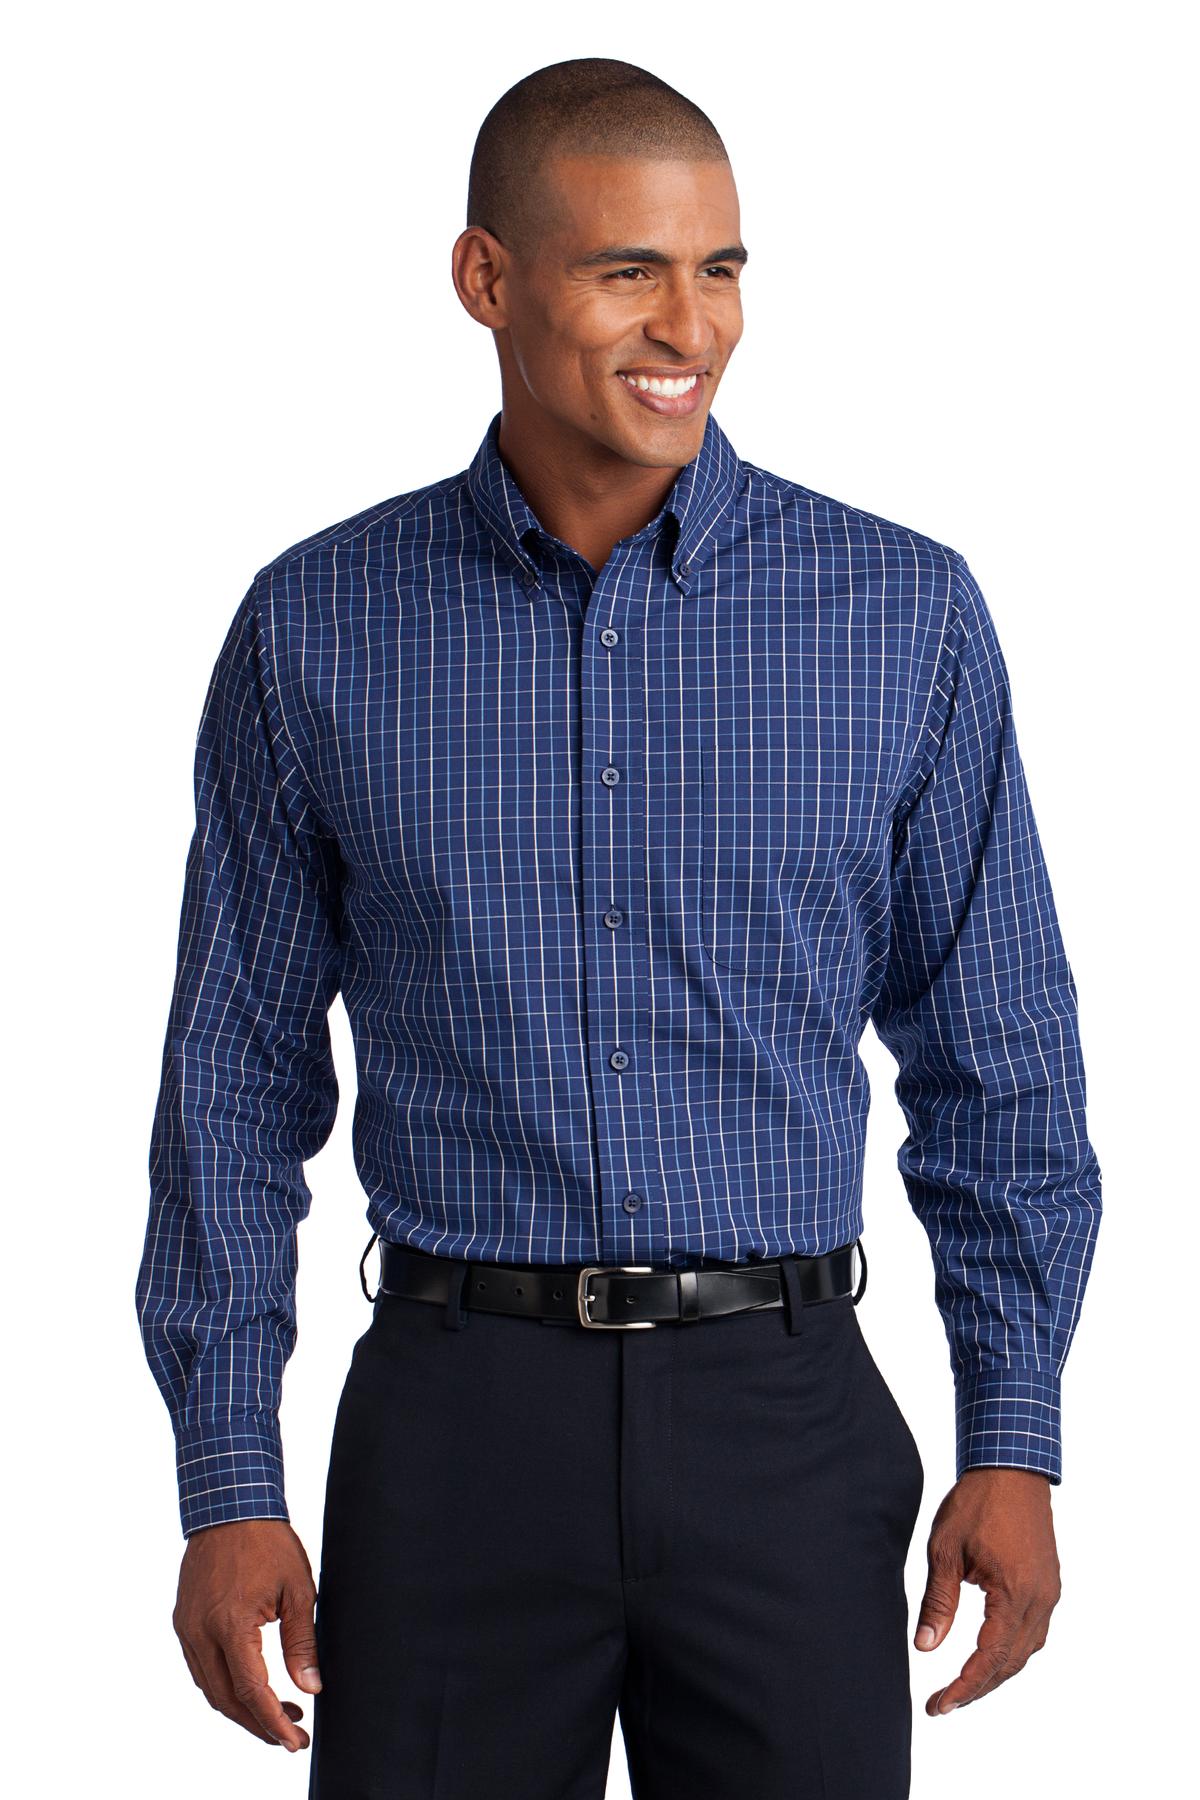 Port Authority Tall Tattersall Easy Care Shirt. TLS642